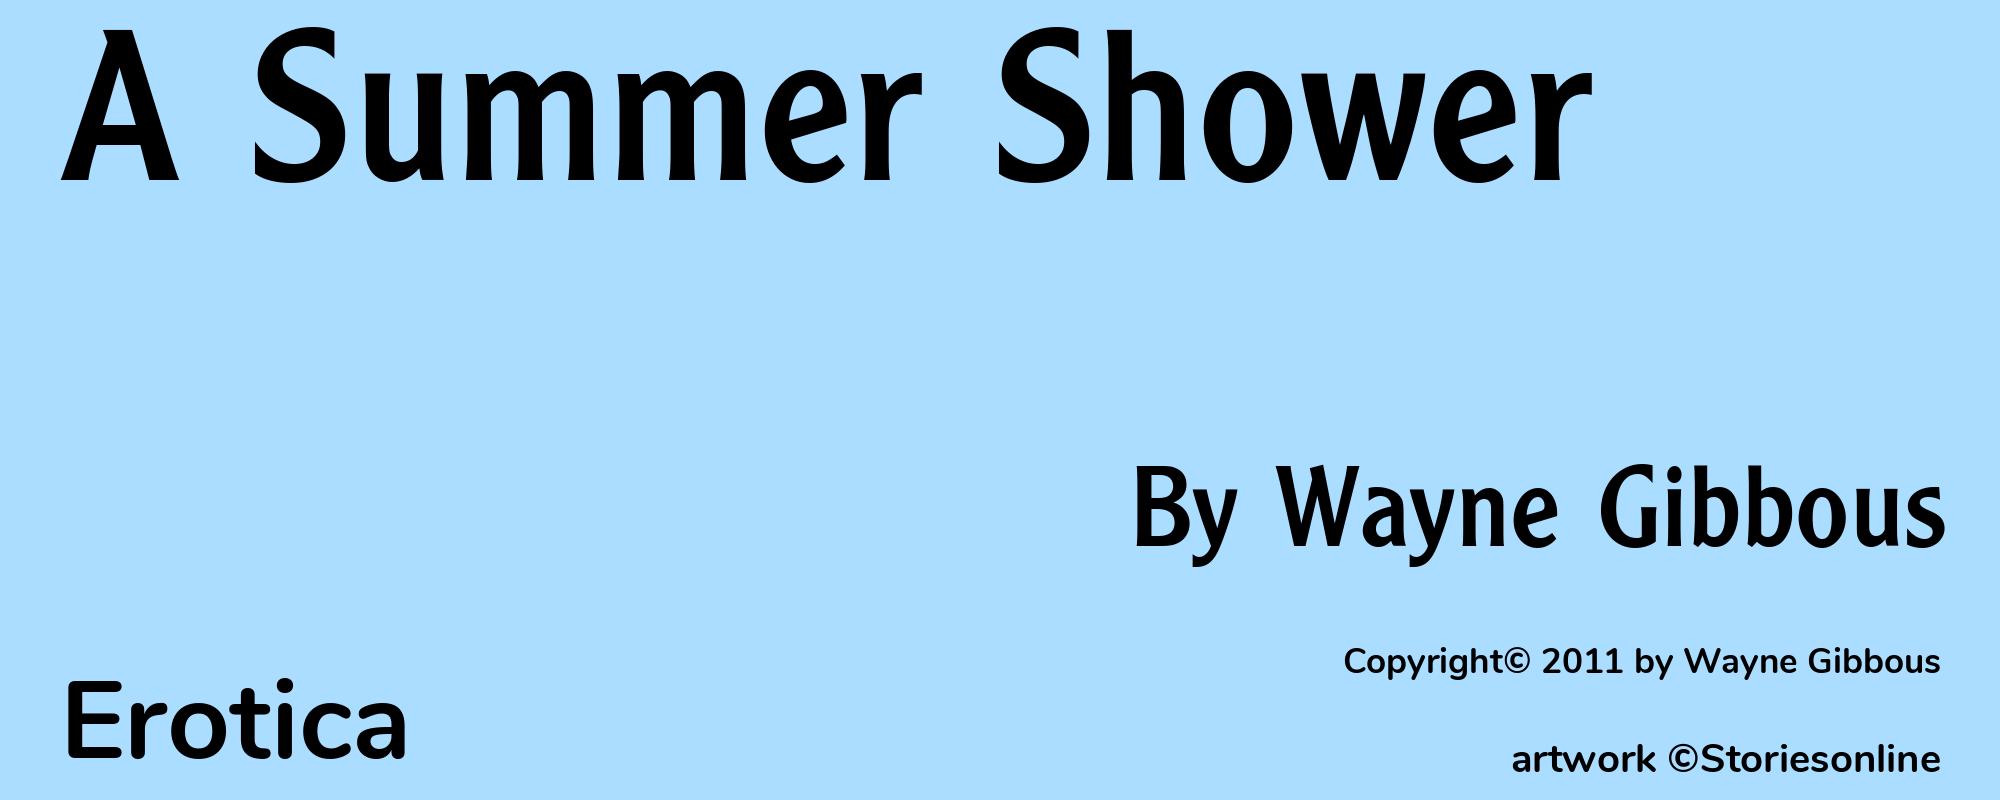 A Summer Shower - Cover